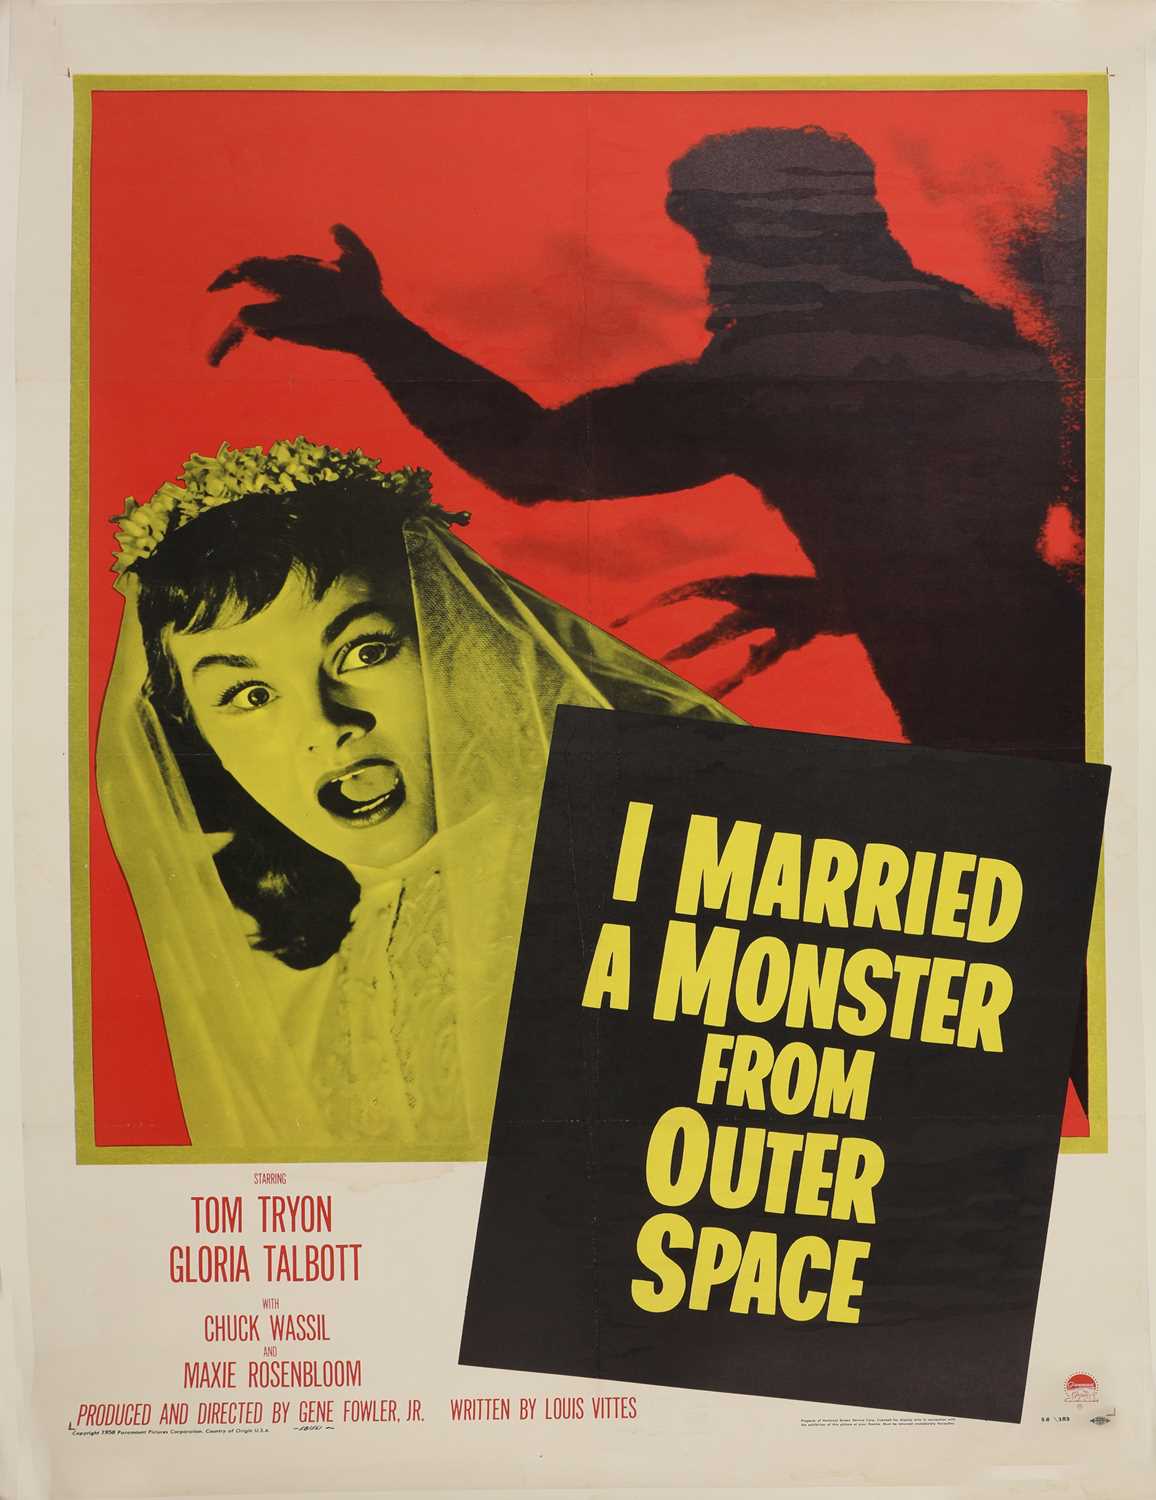 Lot 62 - 'I MARRIED A MONSTER FROM OUTER SPACE'